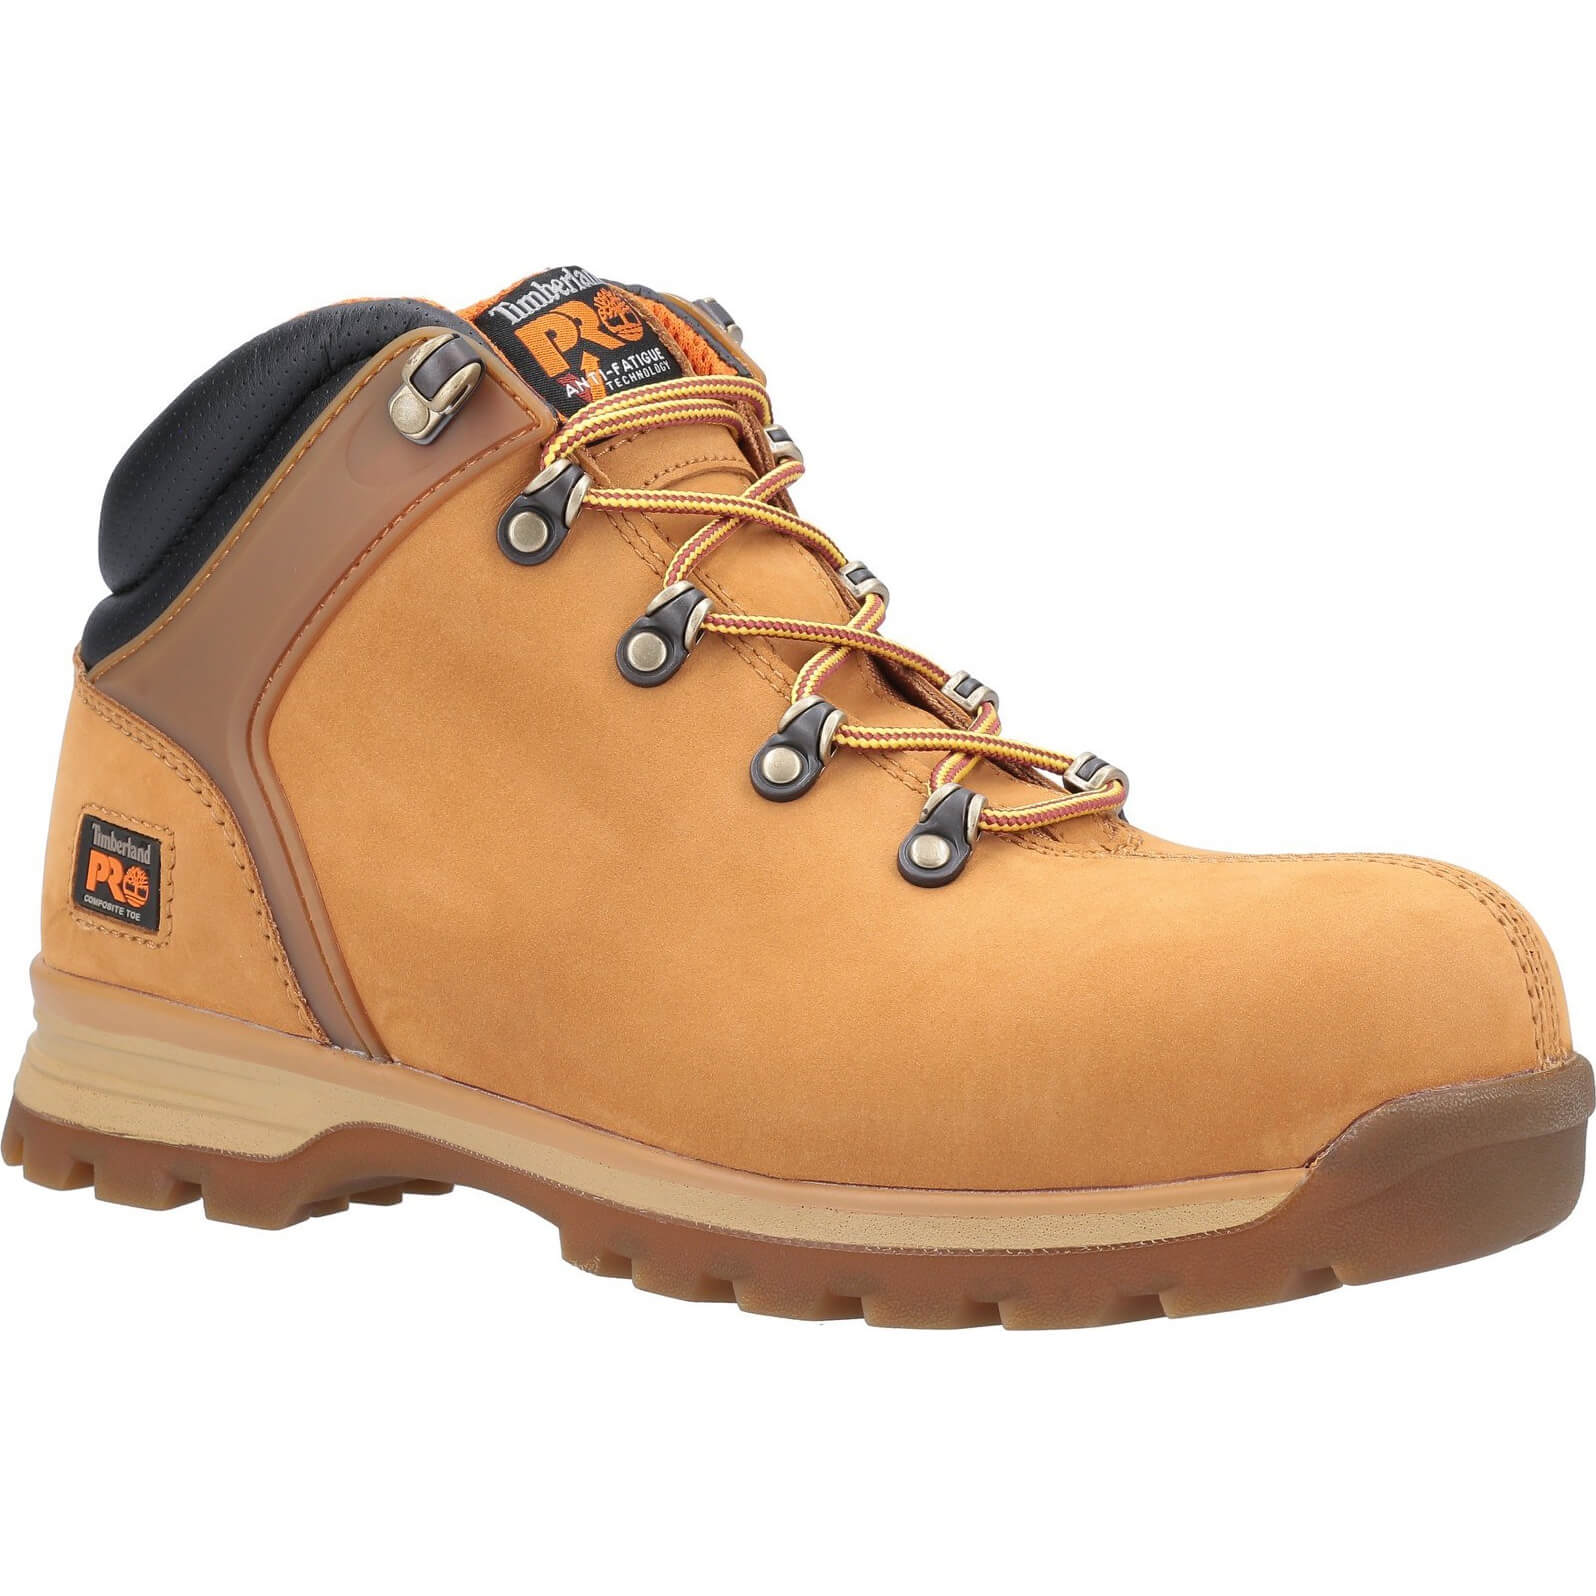 Image of Timberland Pro Splitrock XT Composite Safety Toe Work Boot Wheat Size 10